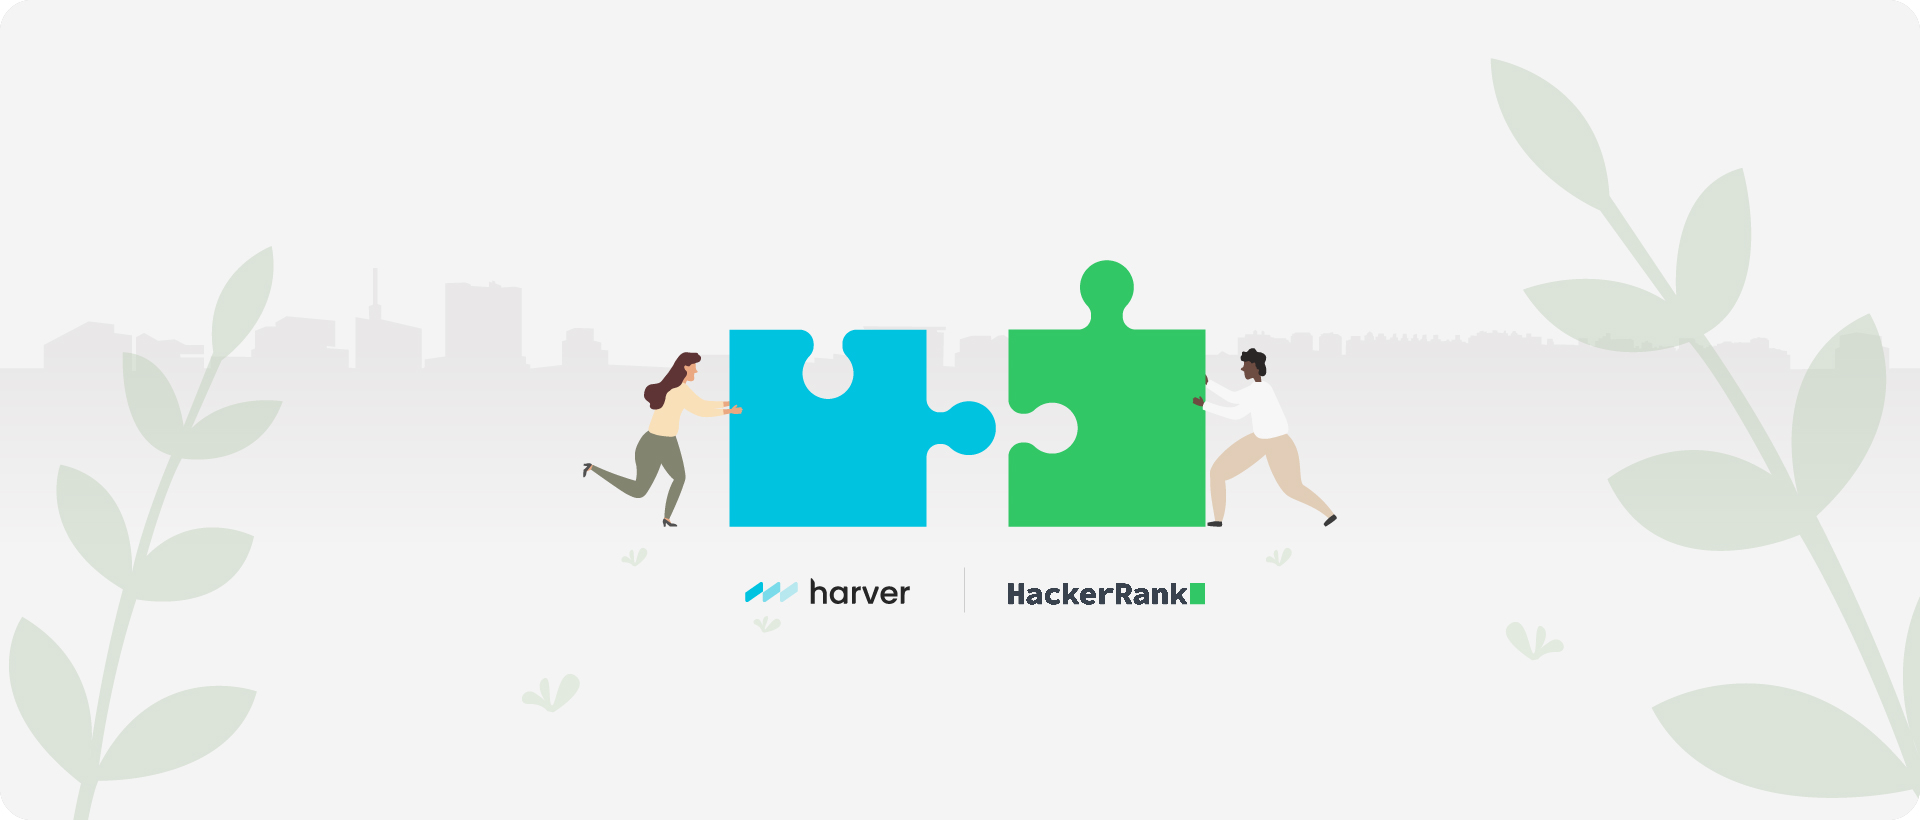 Two puzzle pieces, one representing Harver (soft skills/behavioral assessments) and one representing HackerRank (tech skills/coding assessments)